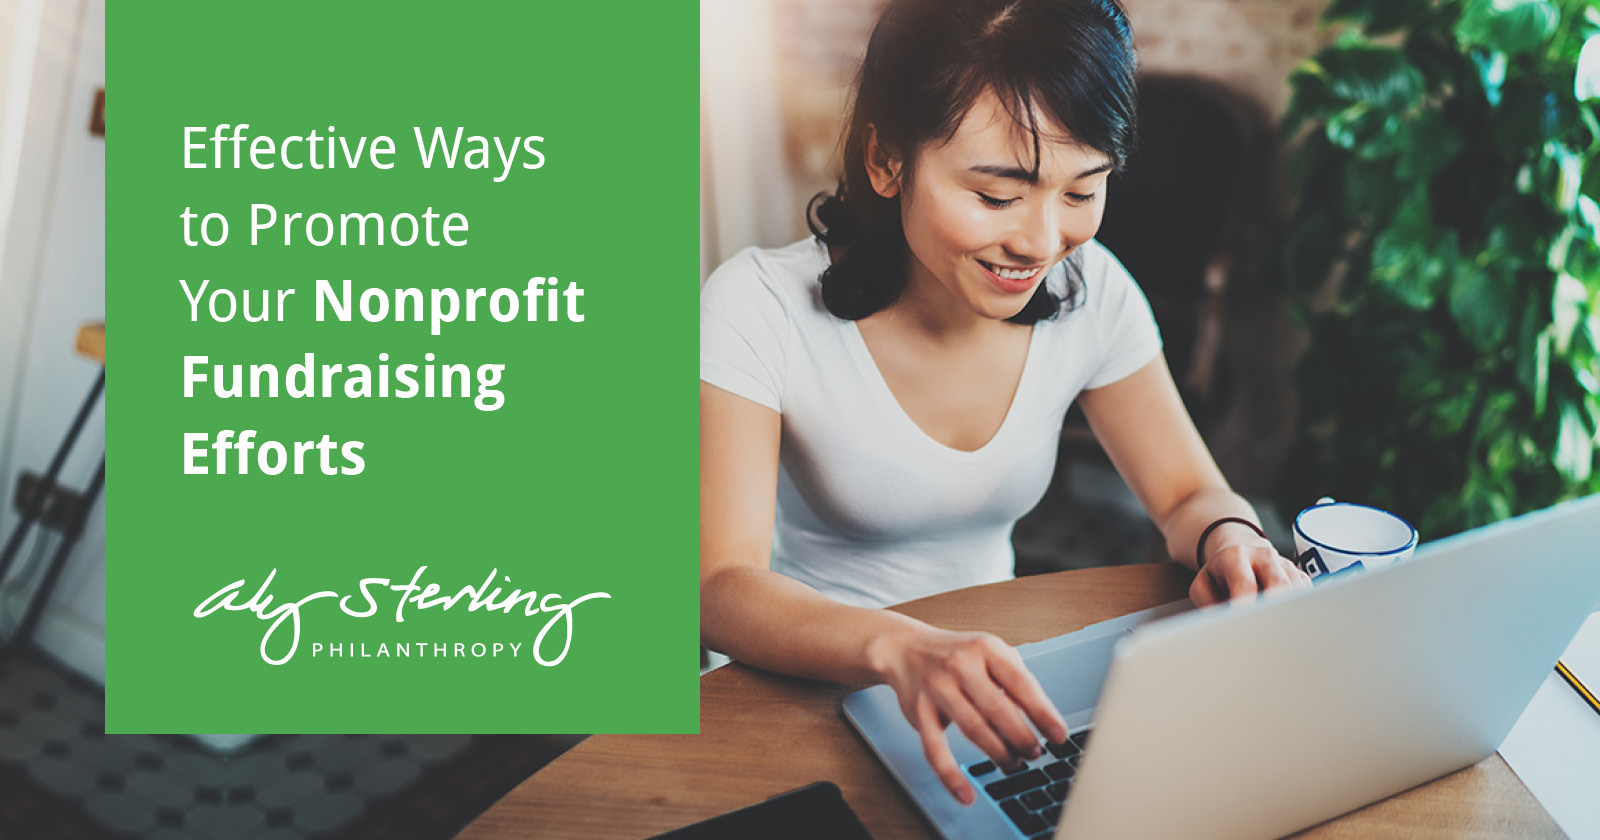 Learn about effective ways to promote your nonprofit fundraising initiatives in this guide.